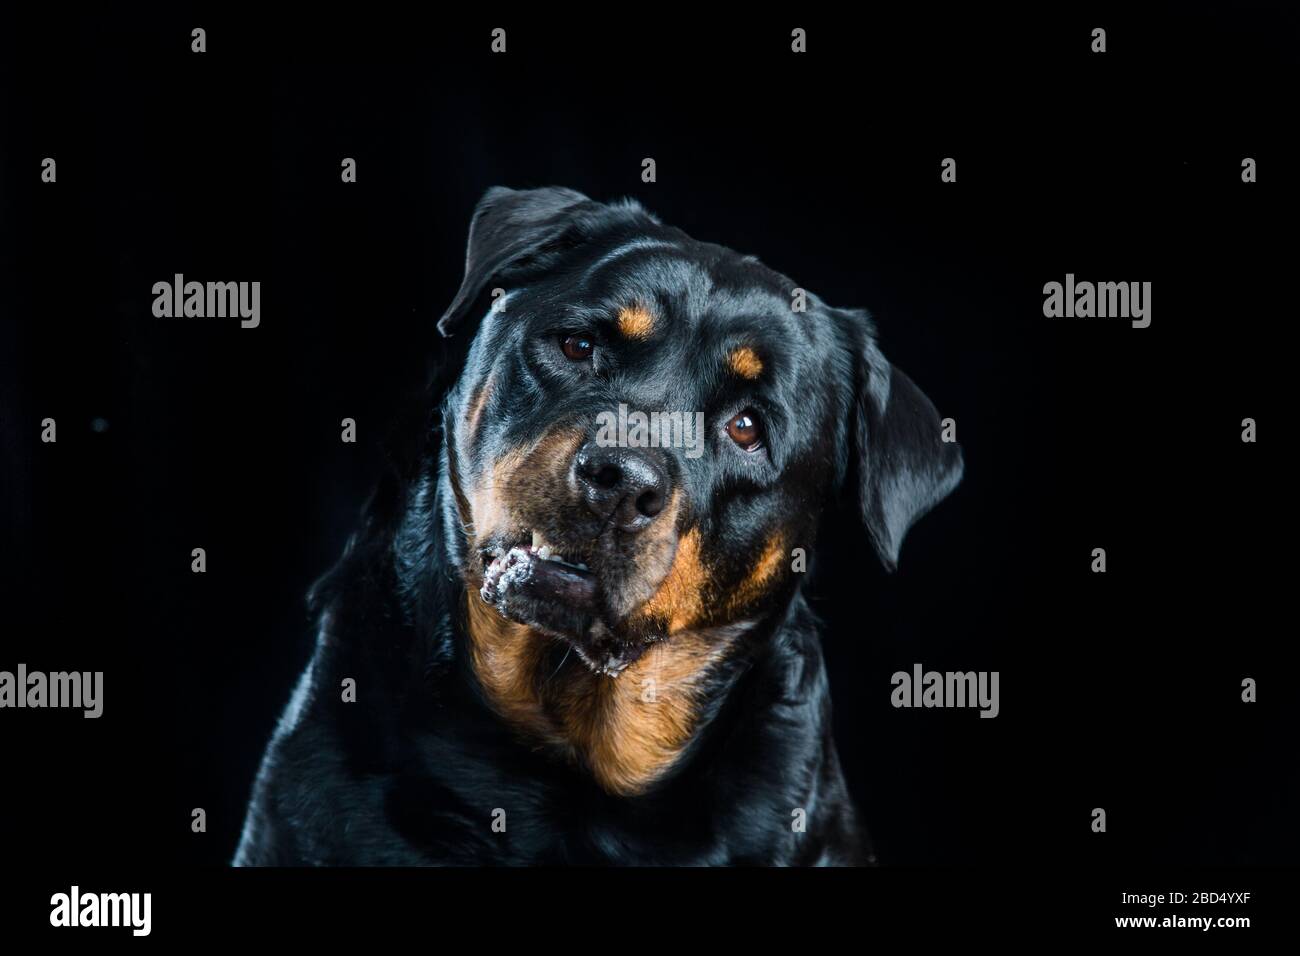 Studio portrait of a Rottweiler with head cocked to one side Stock Photo